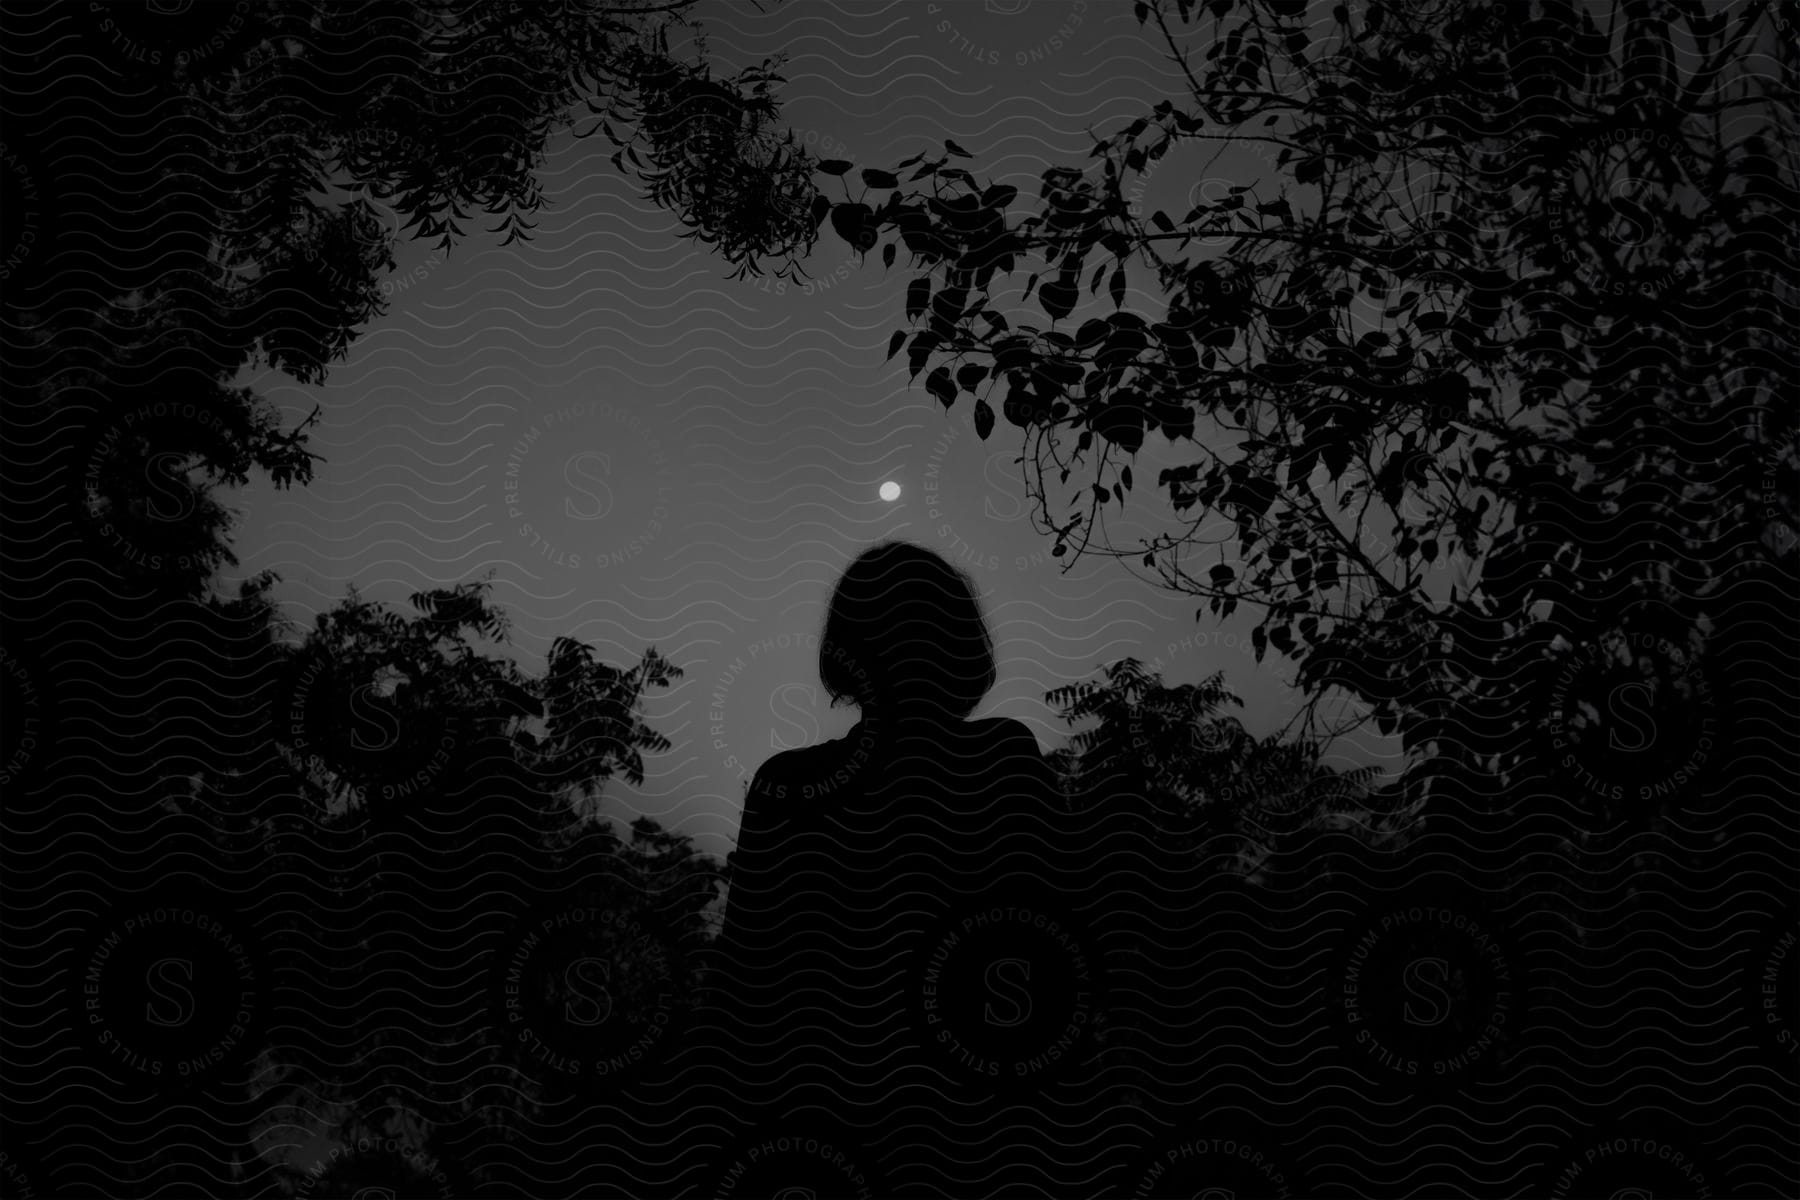 Silhouette of a woman standing among plants and trees looking at the glowing full moon in the sky